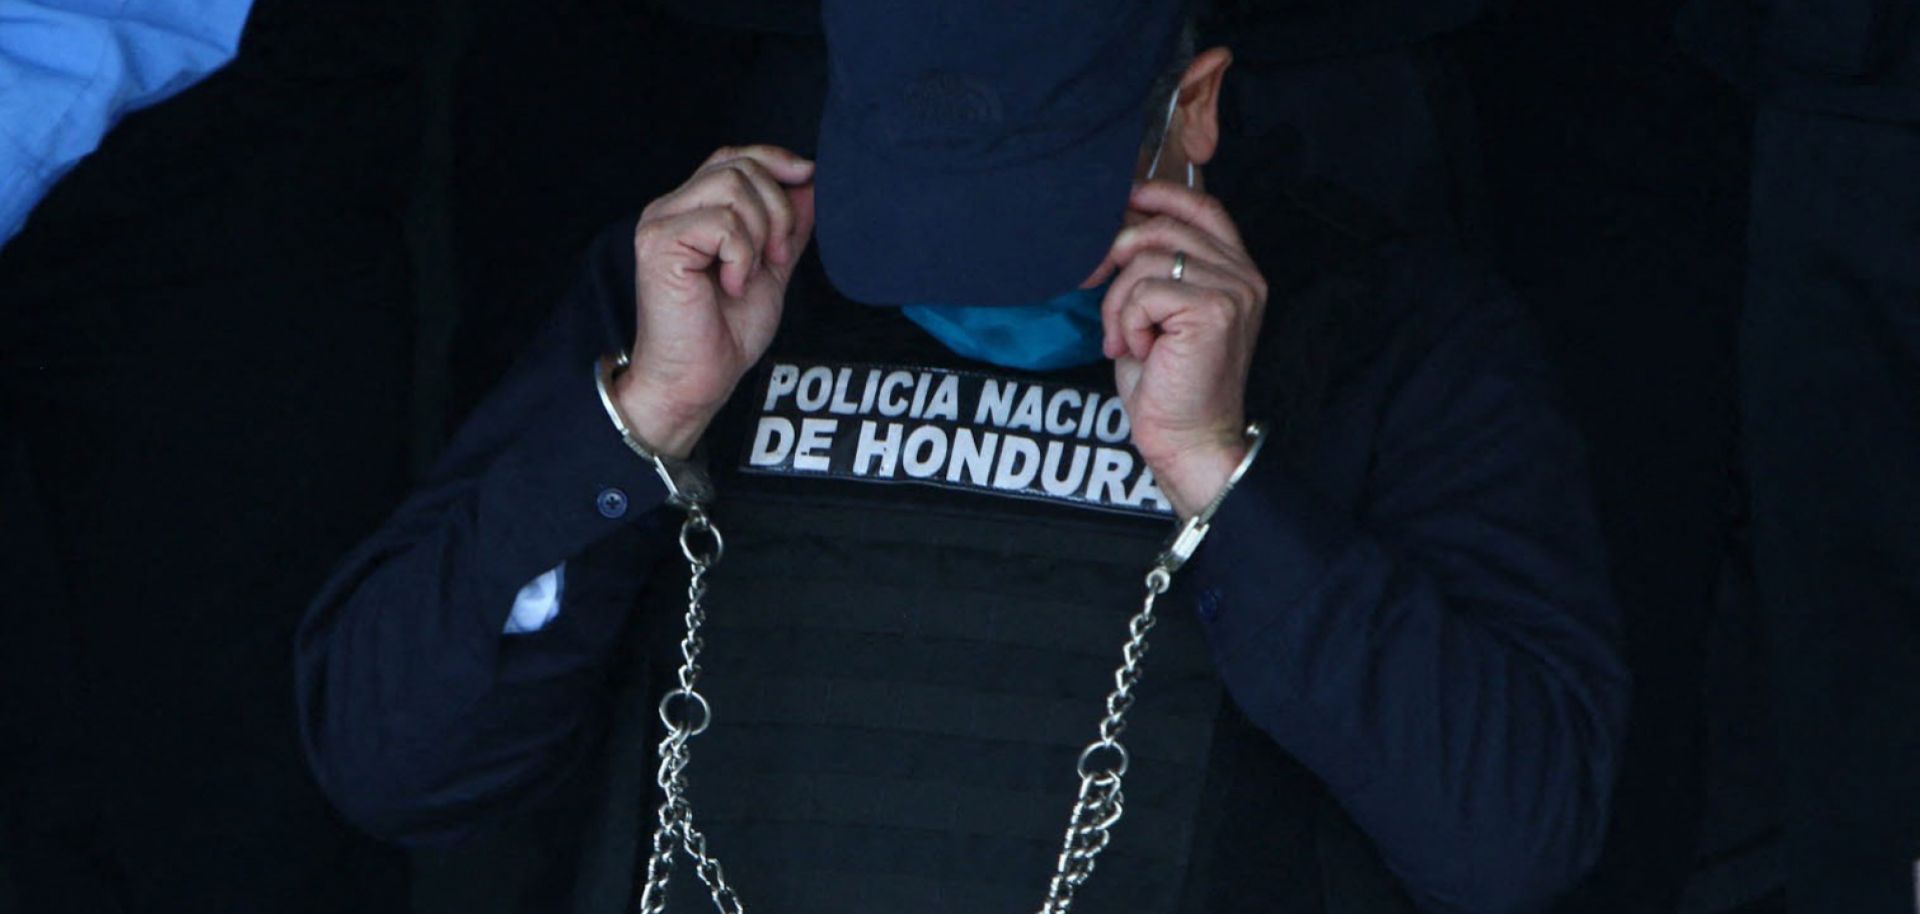 Juan Orlando Hernandez, the former president of Honduras, is seen handcuffed at the headquarters of the country’s police force in Tegucigalpa on Feb. 15, 2022. He was arrested after receiving an extradition order from the United States. 